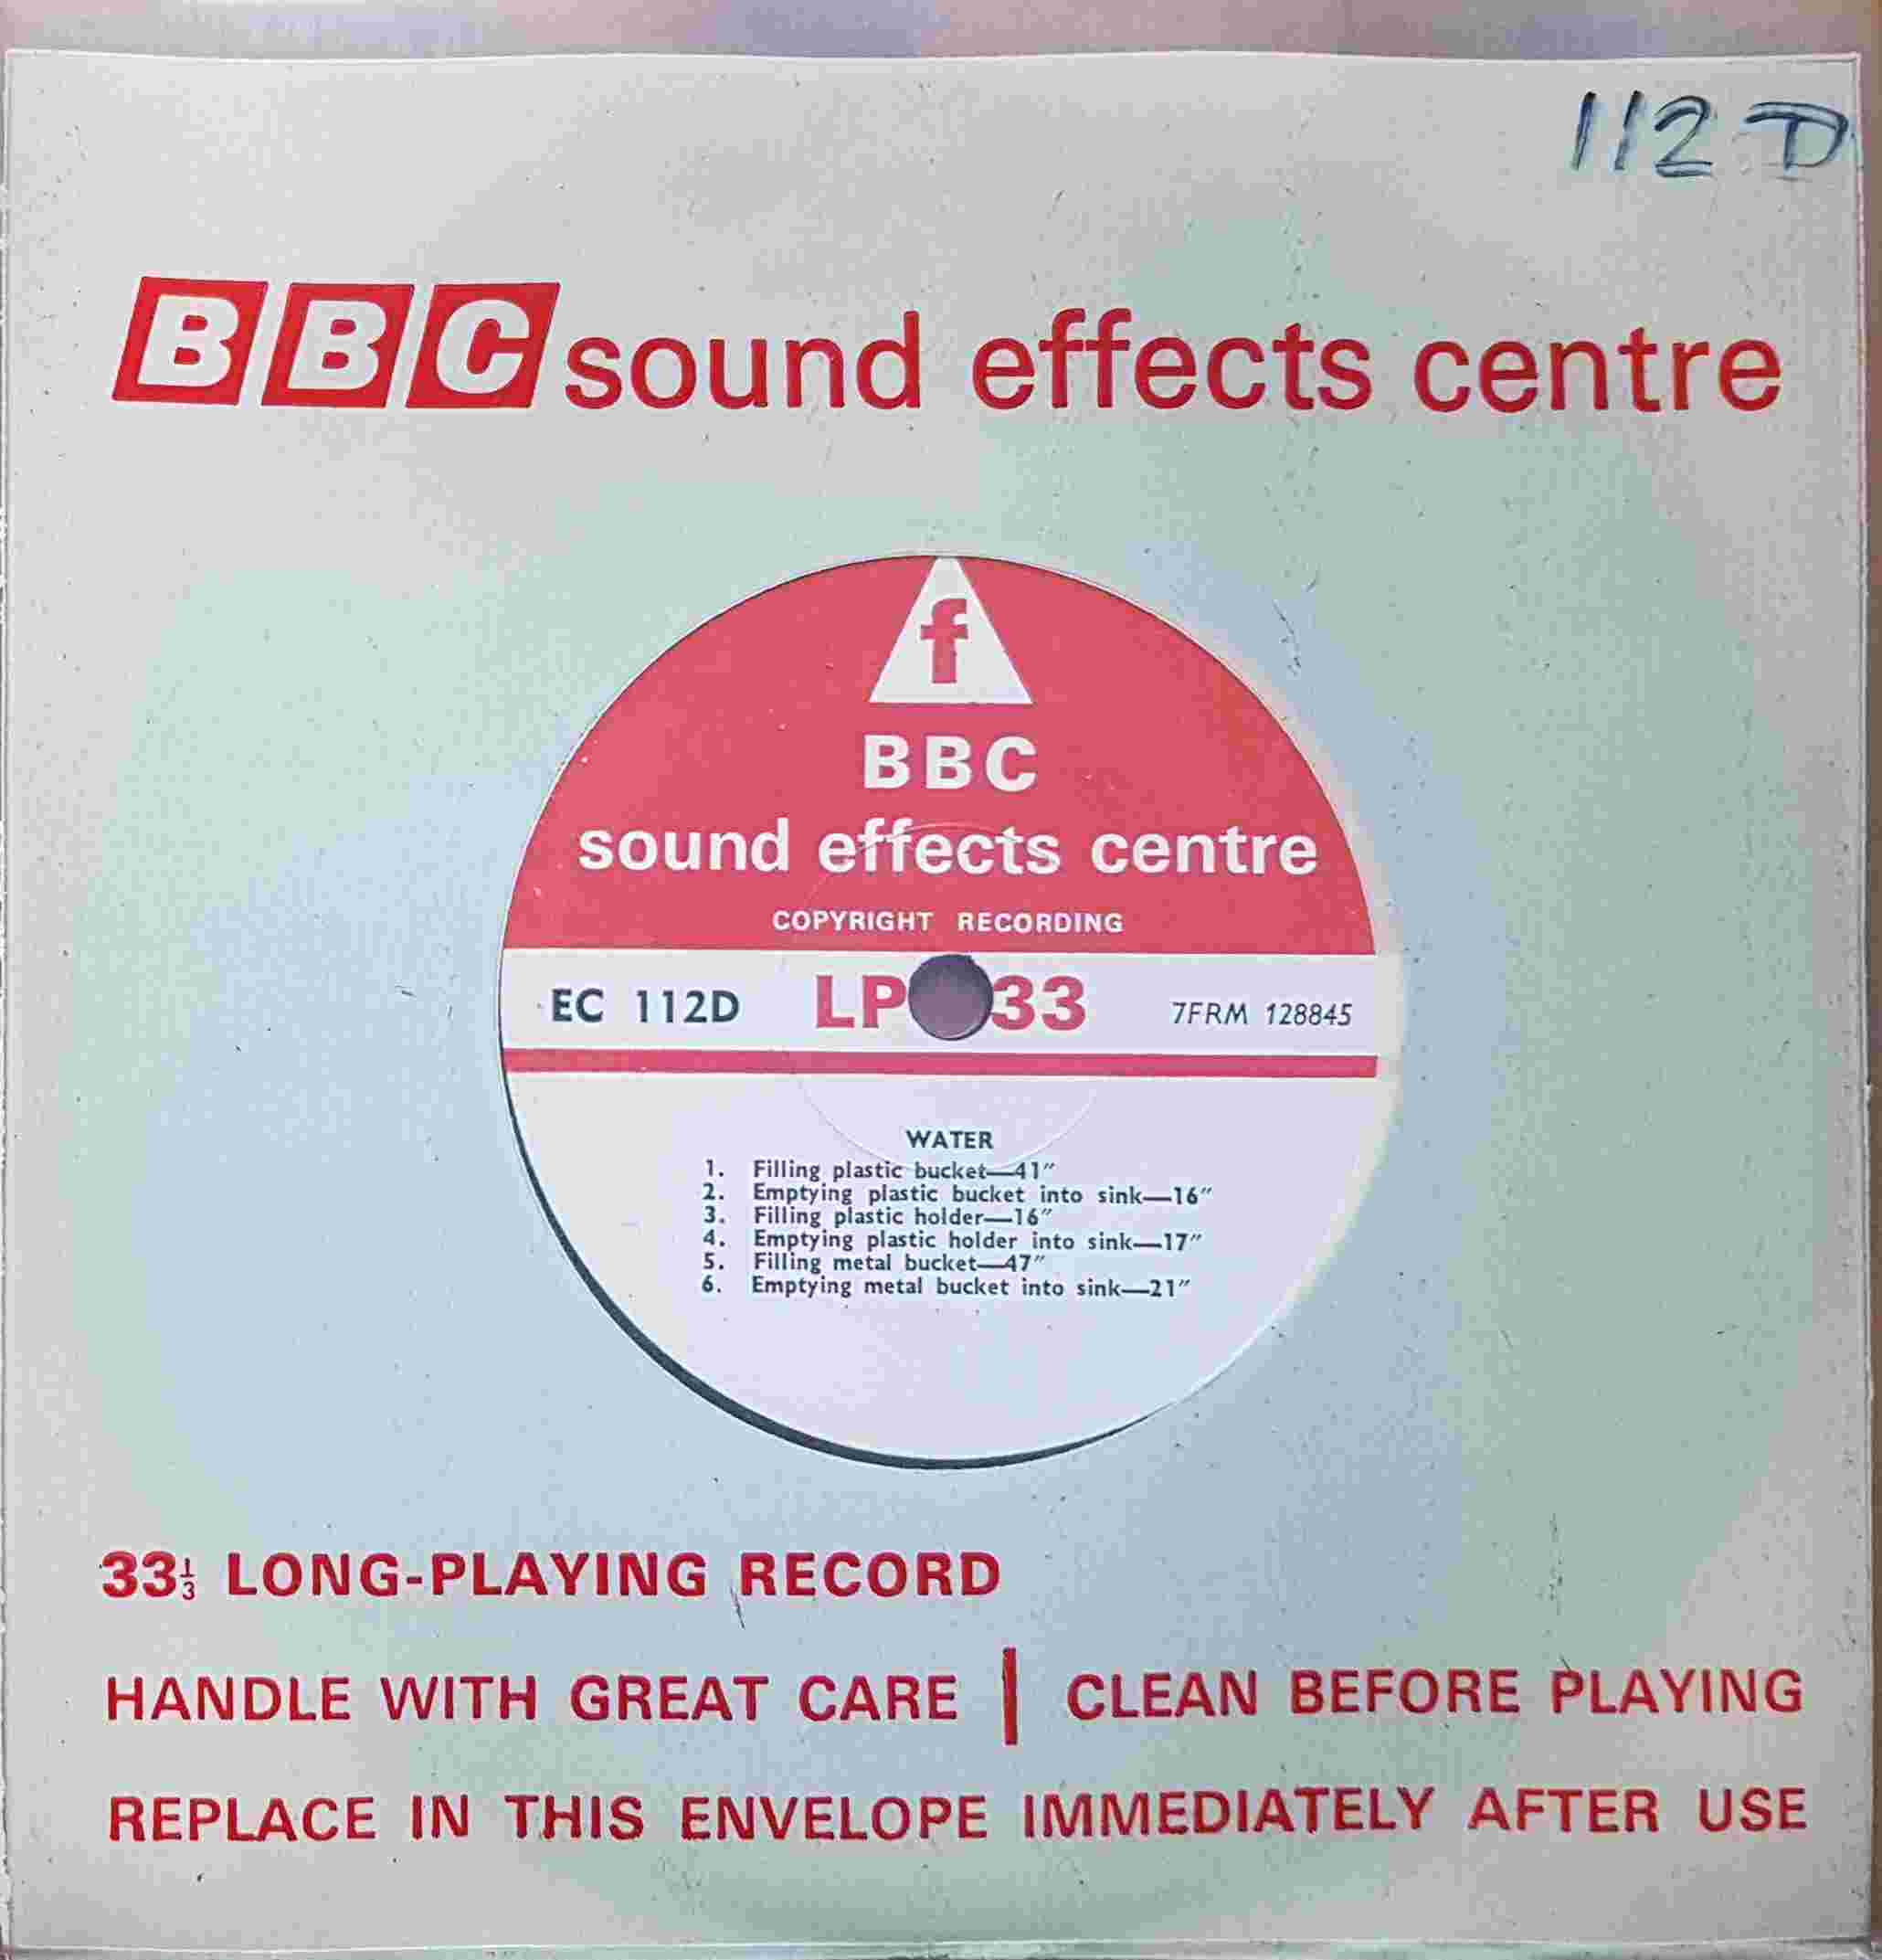 Picture of EC 112D Water by artist Not registered from the BBC singles - Records and Tapes library